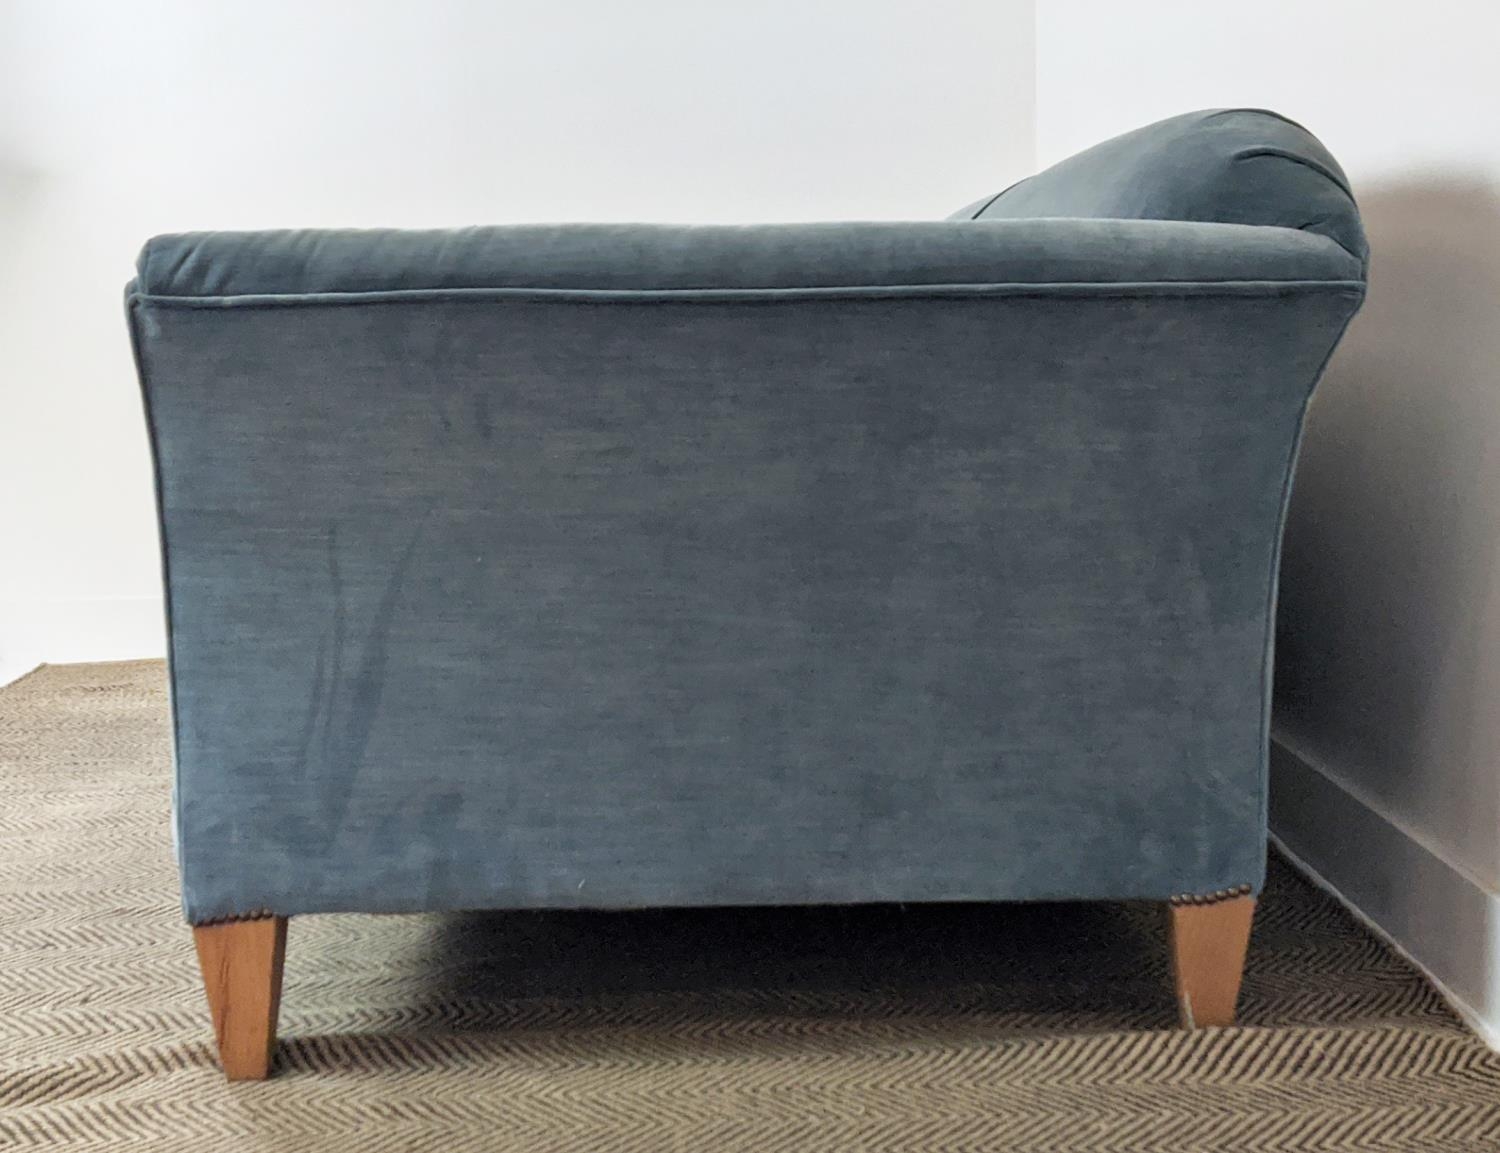 SOFA, velvet upholstered with seat cushions and beechwood legs, 83cm H x 224cm W x 103cm D. - Image 7 of 10